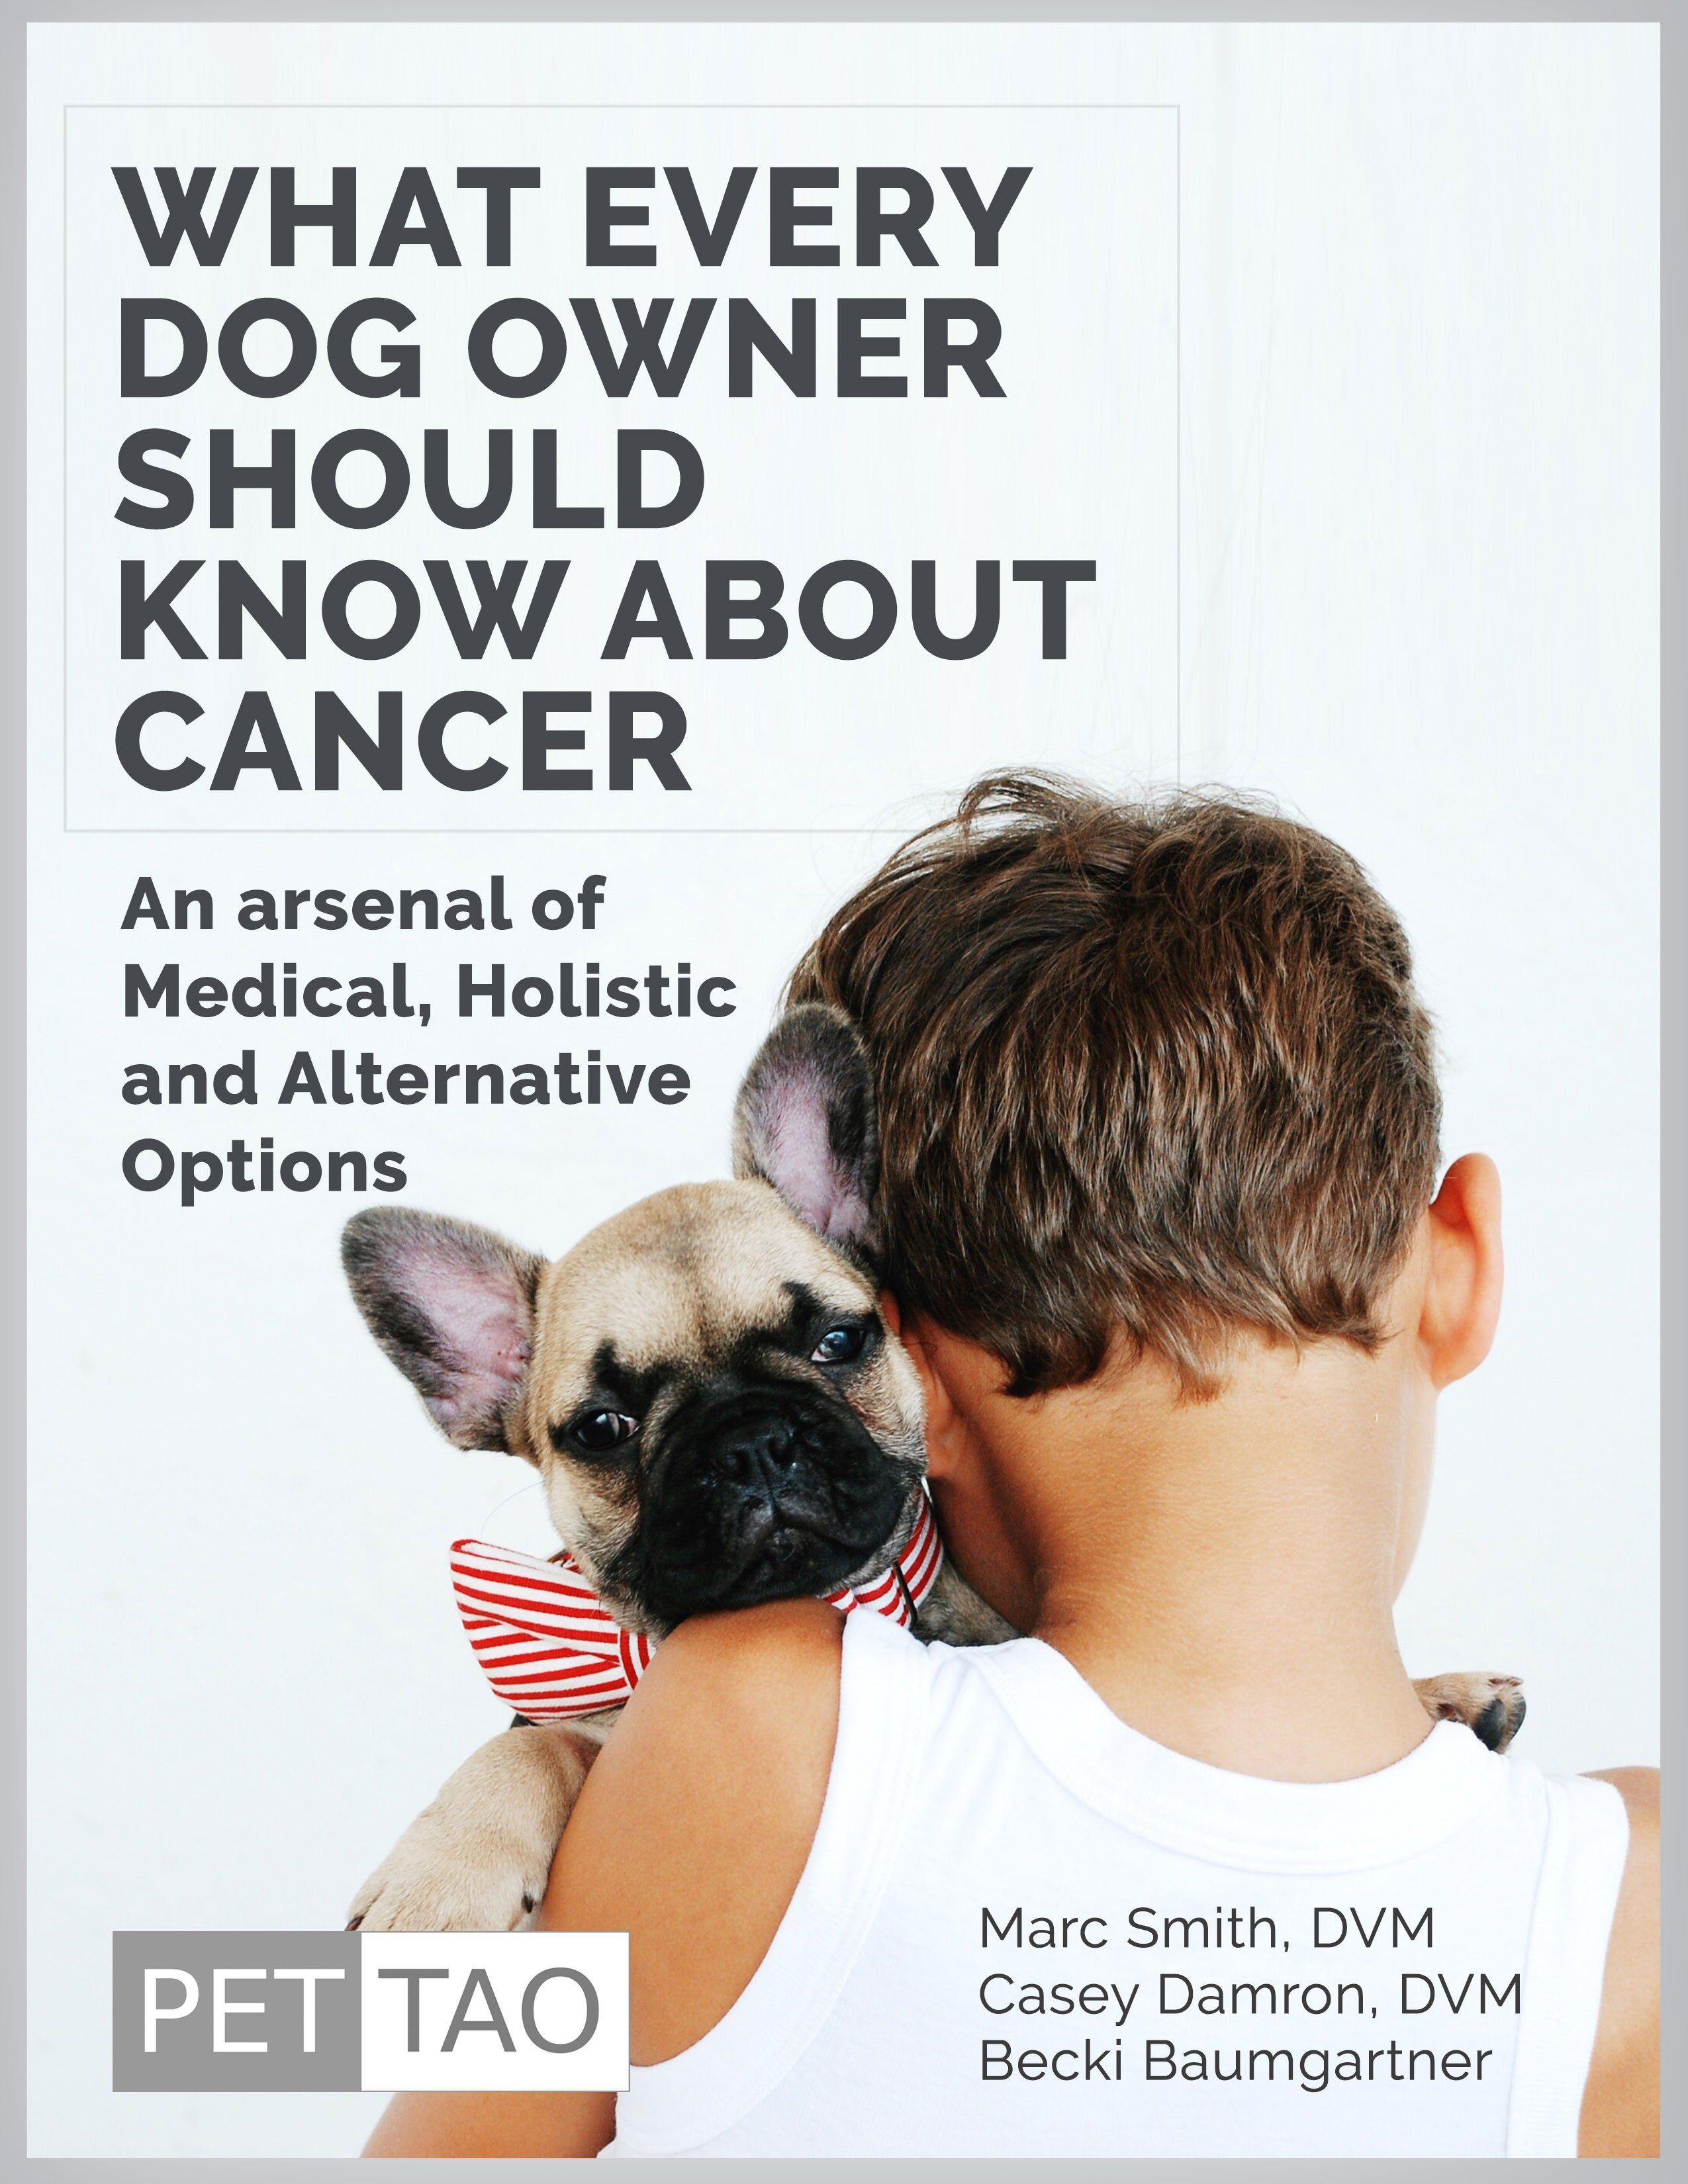 What Every Dog Owner Should Know About Cancer: An Arsenal of Medical, Holistic & Alternative Options ebook cover